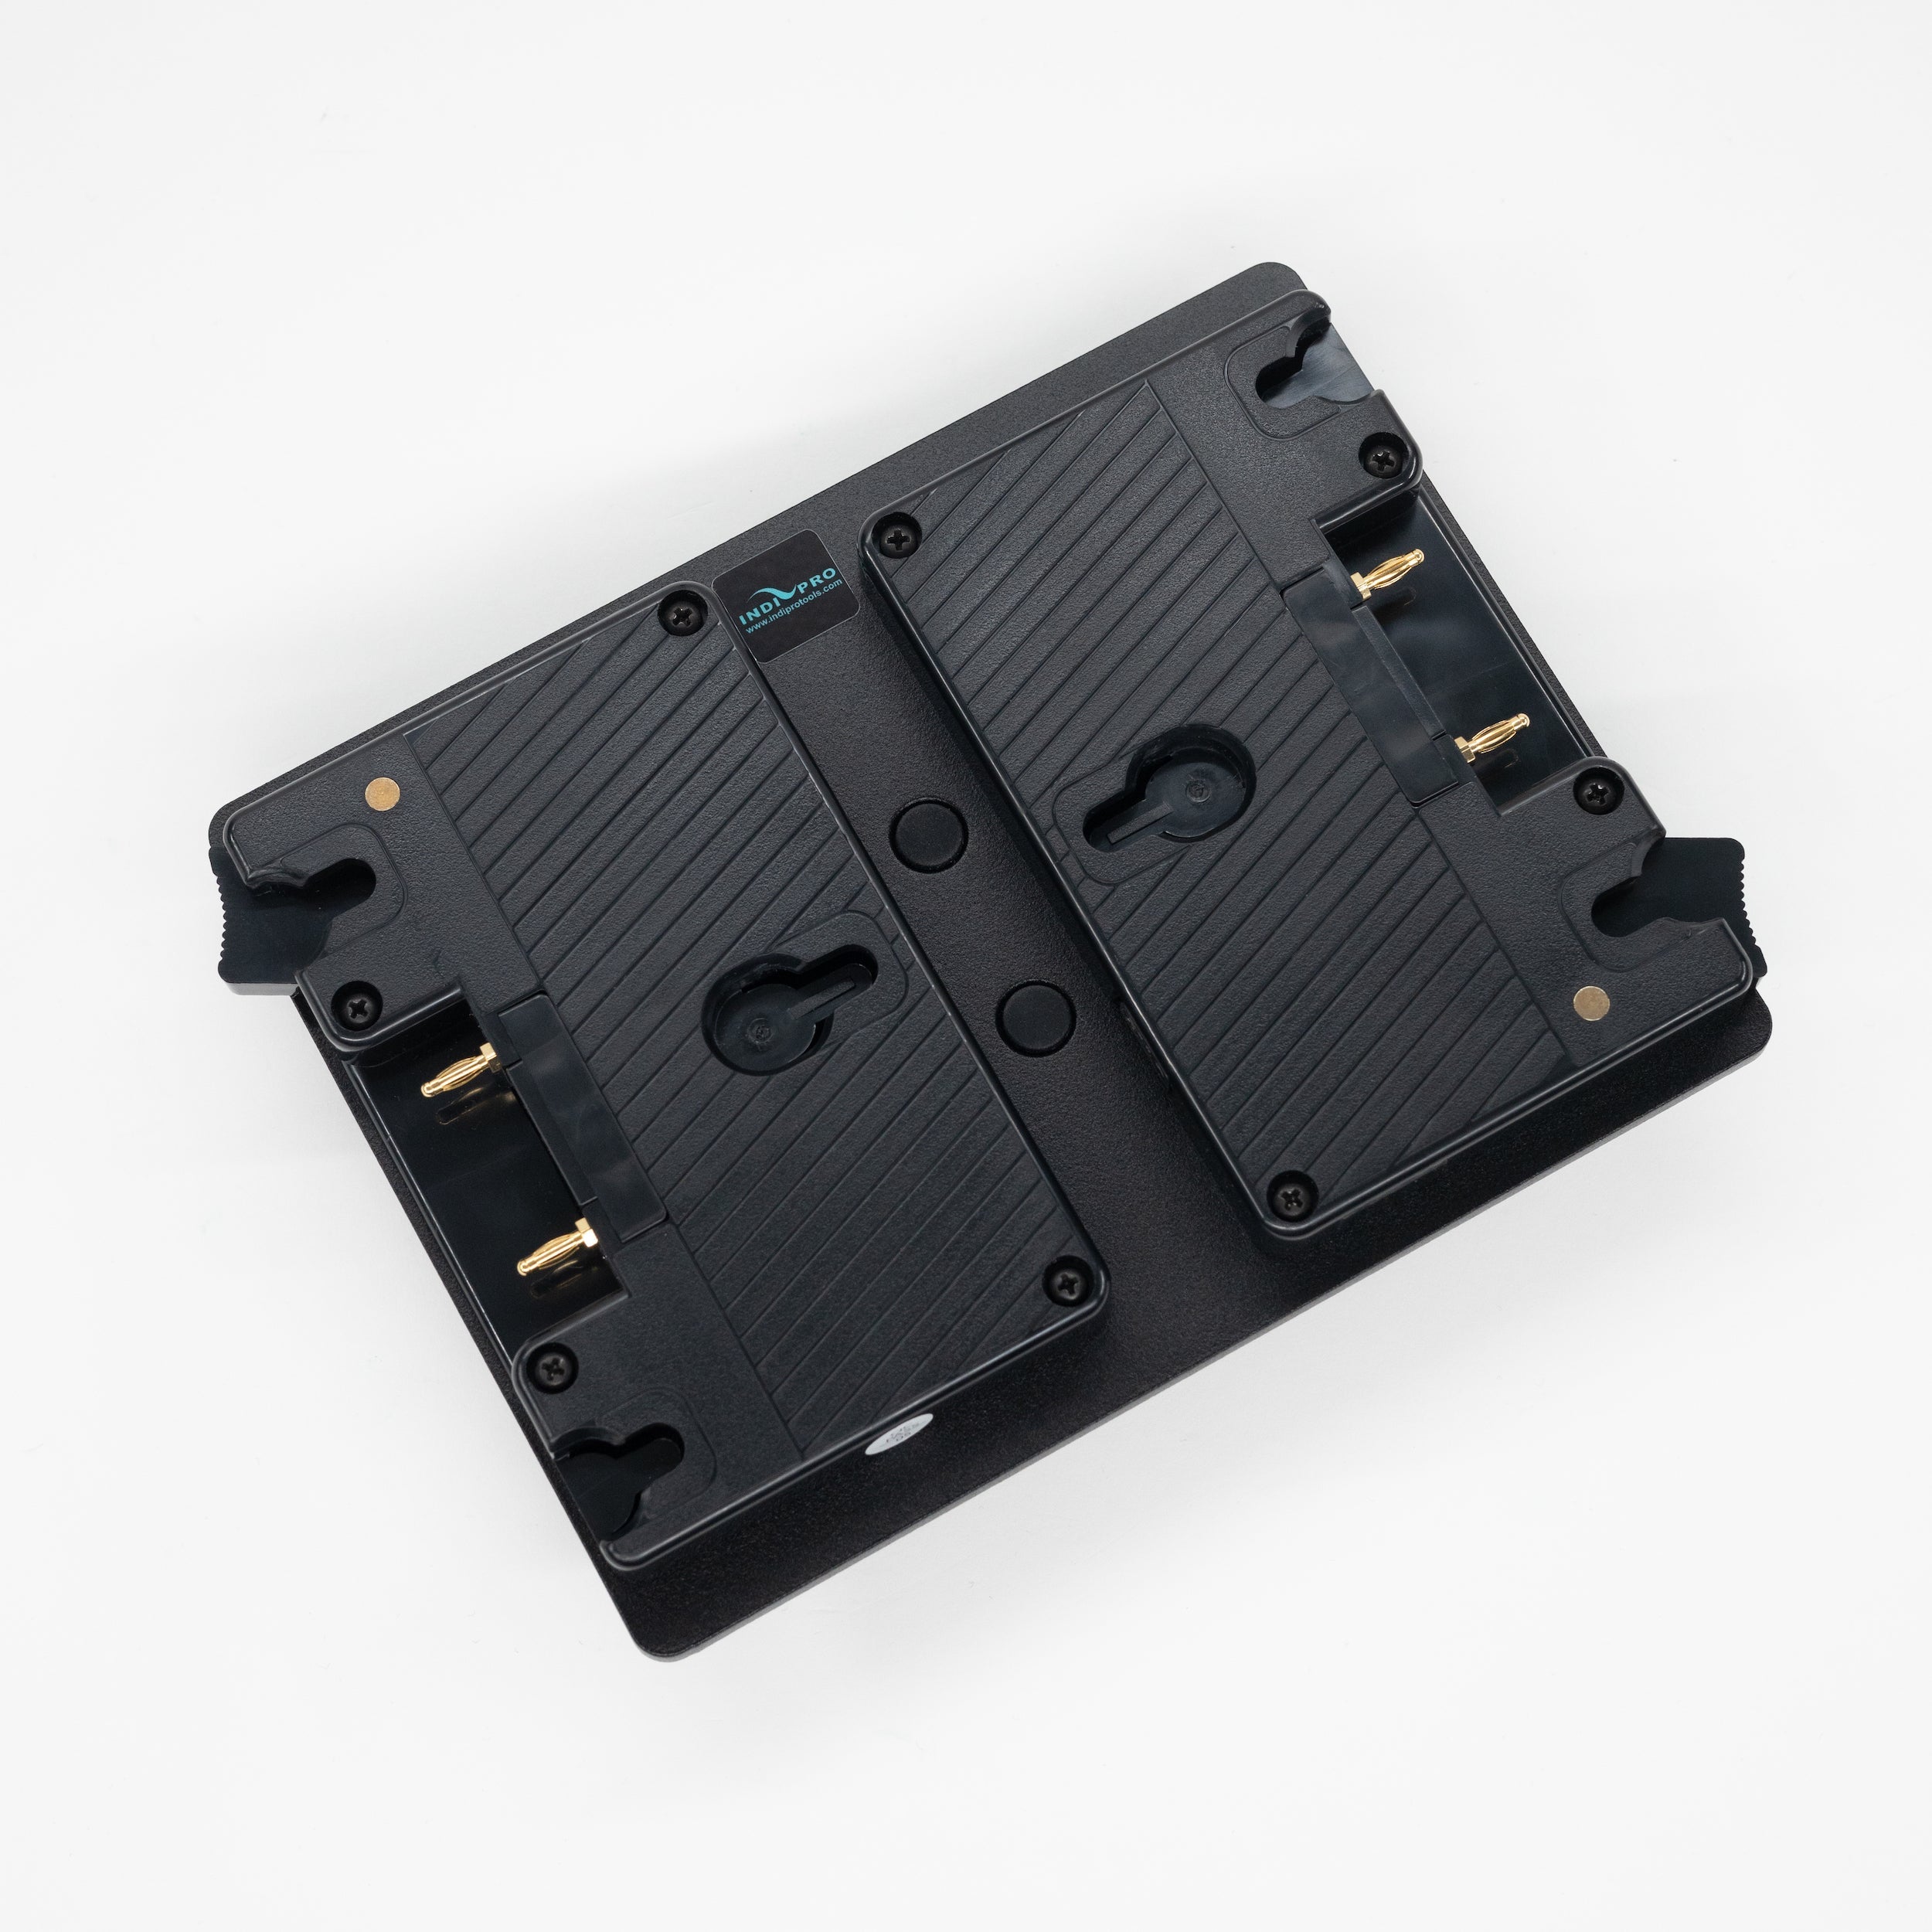 Dual Gold Mount Adapter Plates w/ D-taps to V-Mount Lock Plate (Hot Swappable) Indipro Tools 